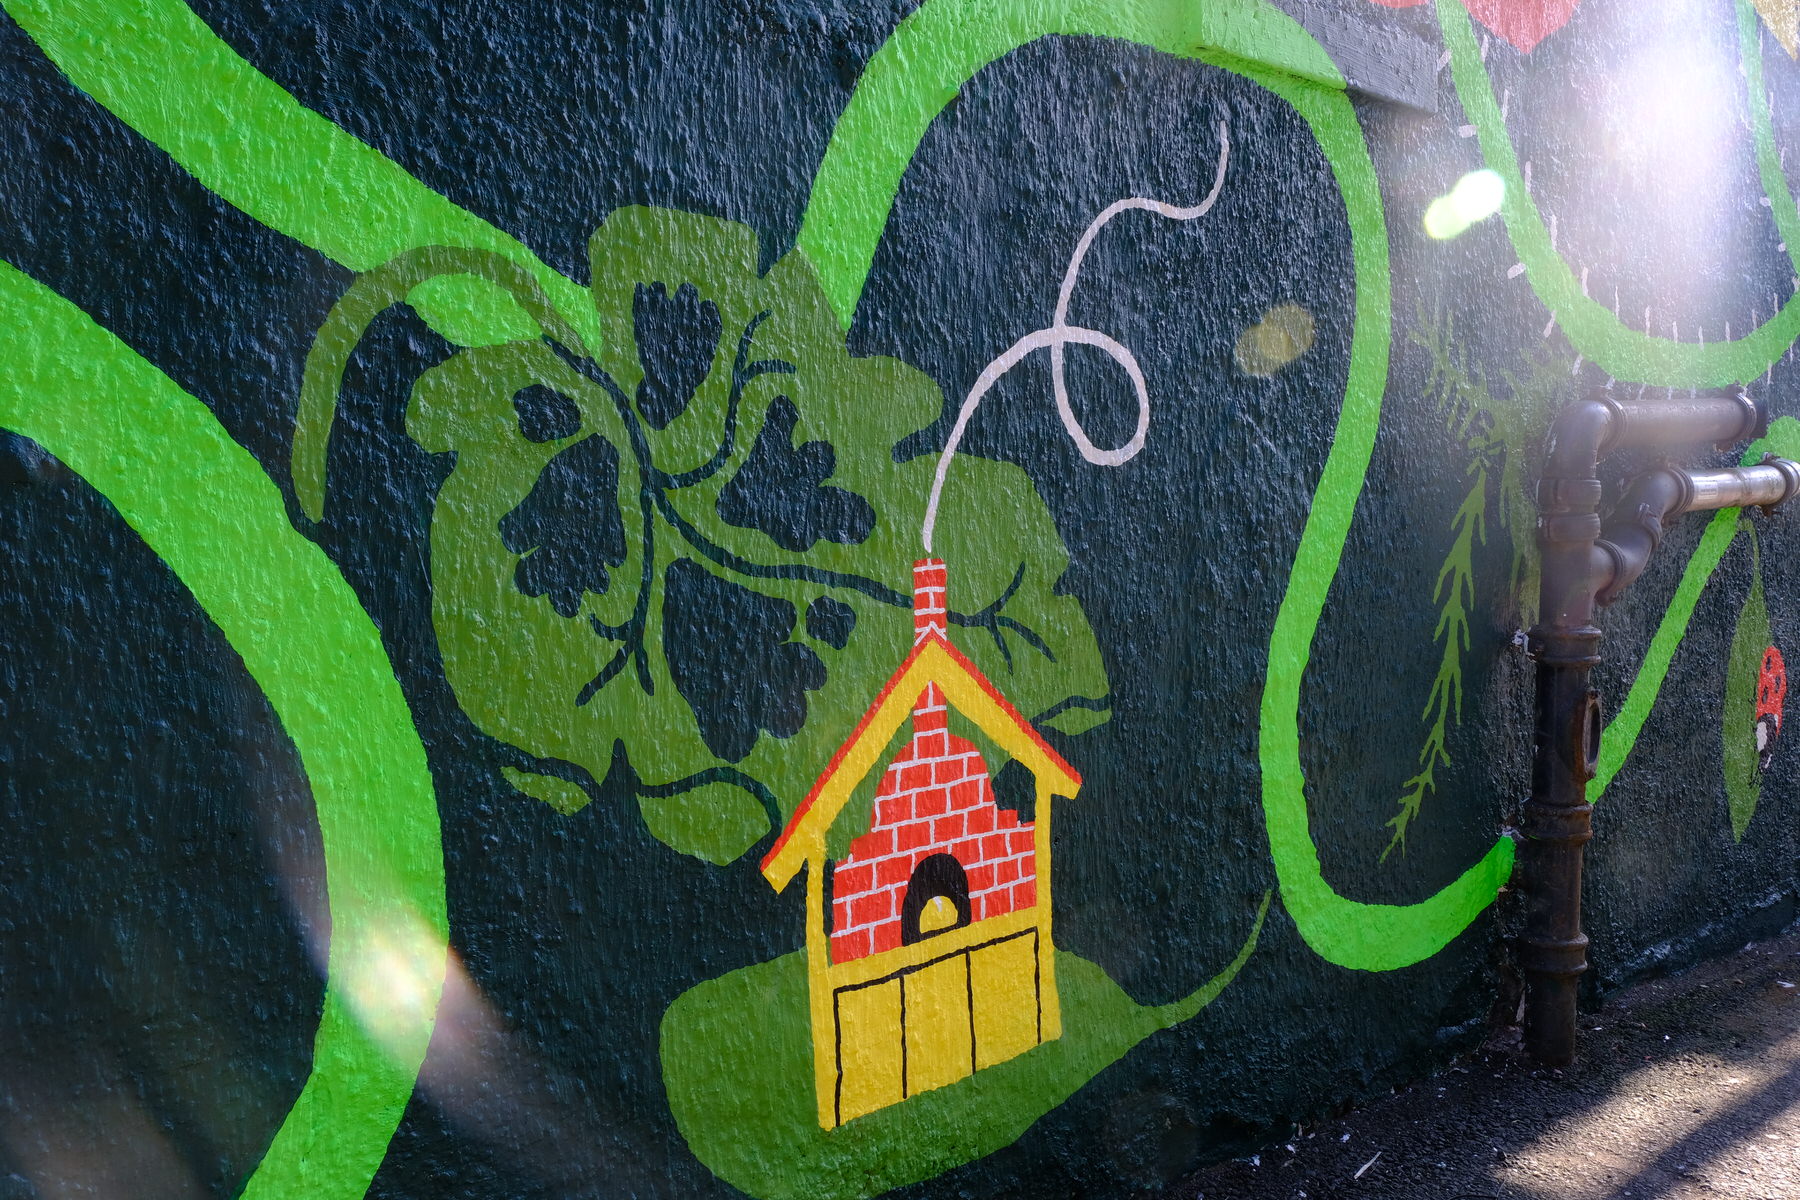 Image shows the Reid Lane mural graffiti with a community garden theme. The artwork contains local community garden flowers and many animals including snails, birds, ladybirds and cats. Mural by Ida Henrich